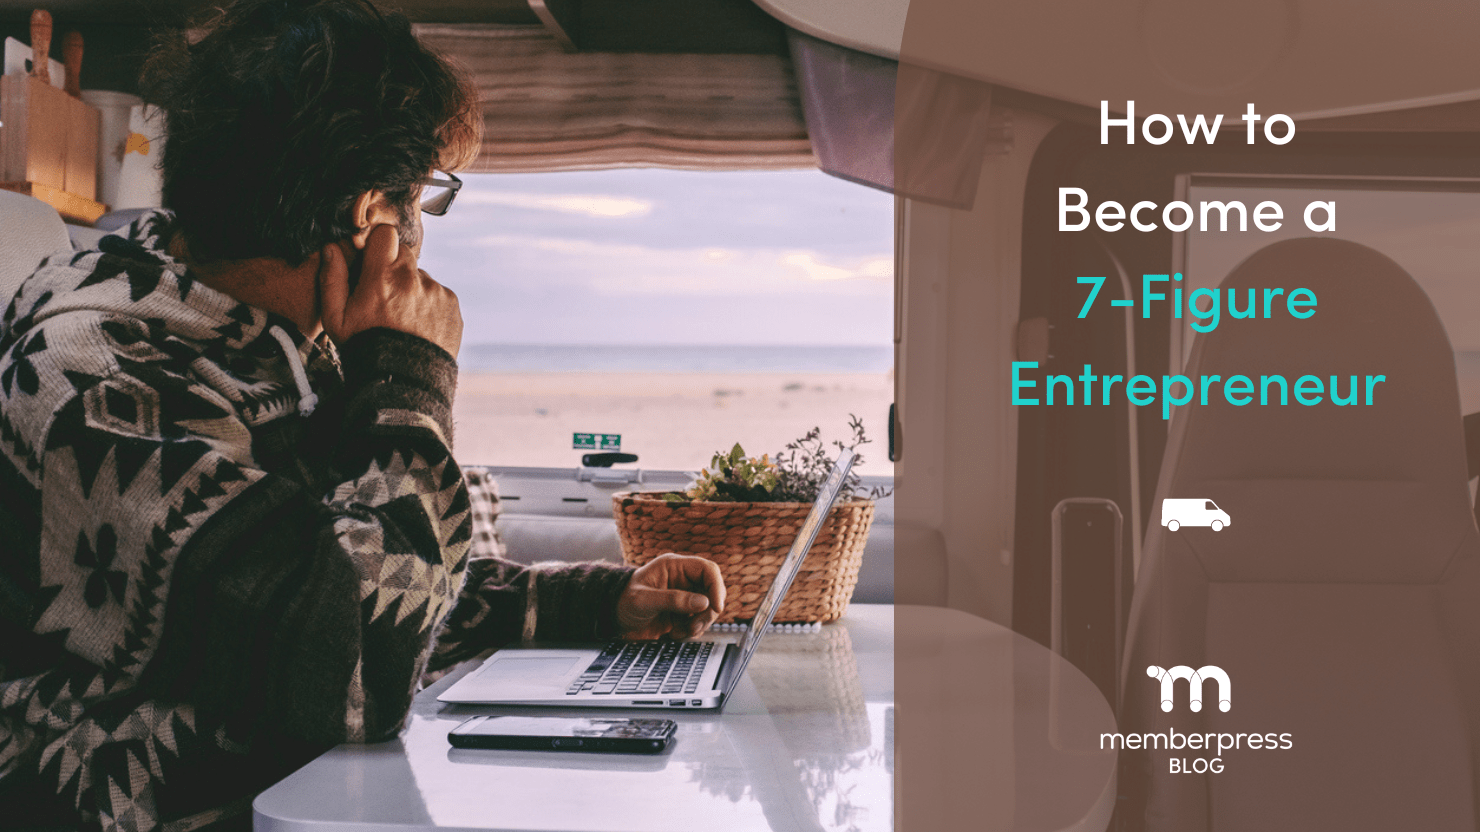 How to become a 7 figure entrepreneur